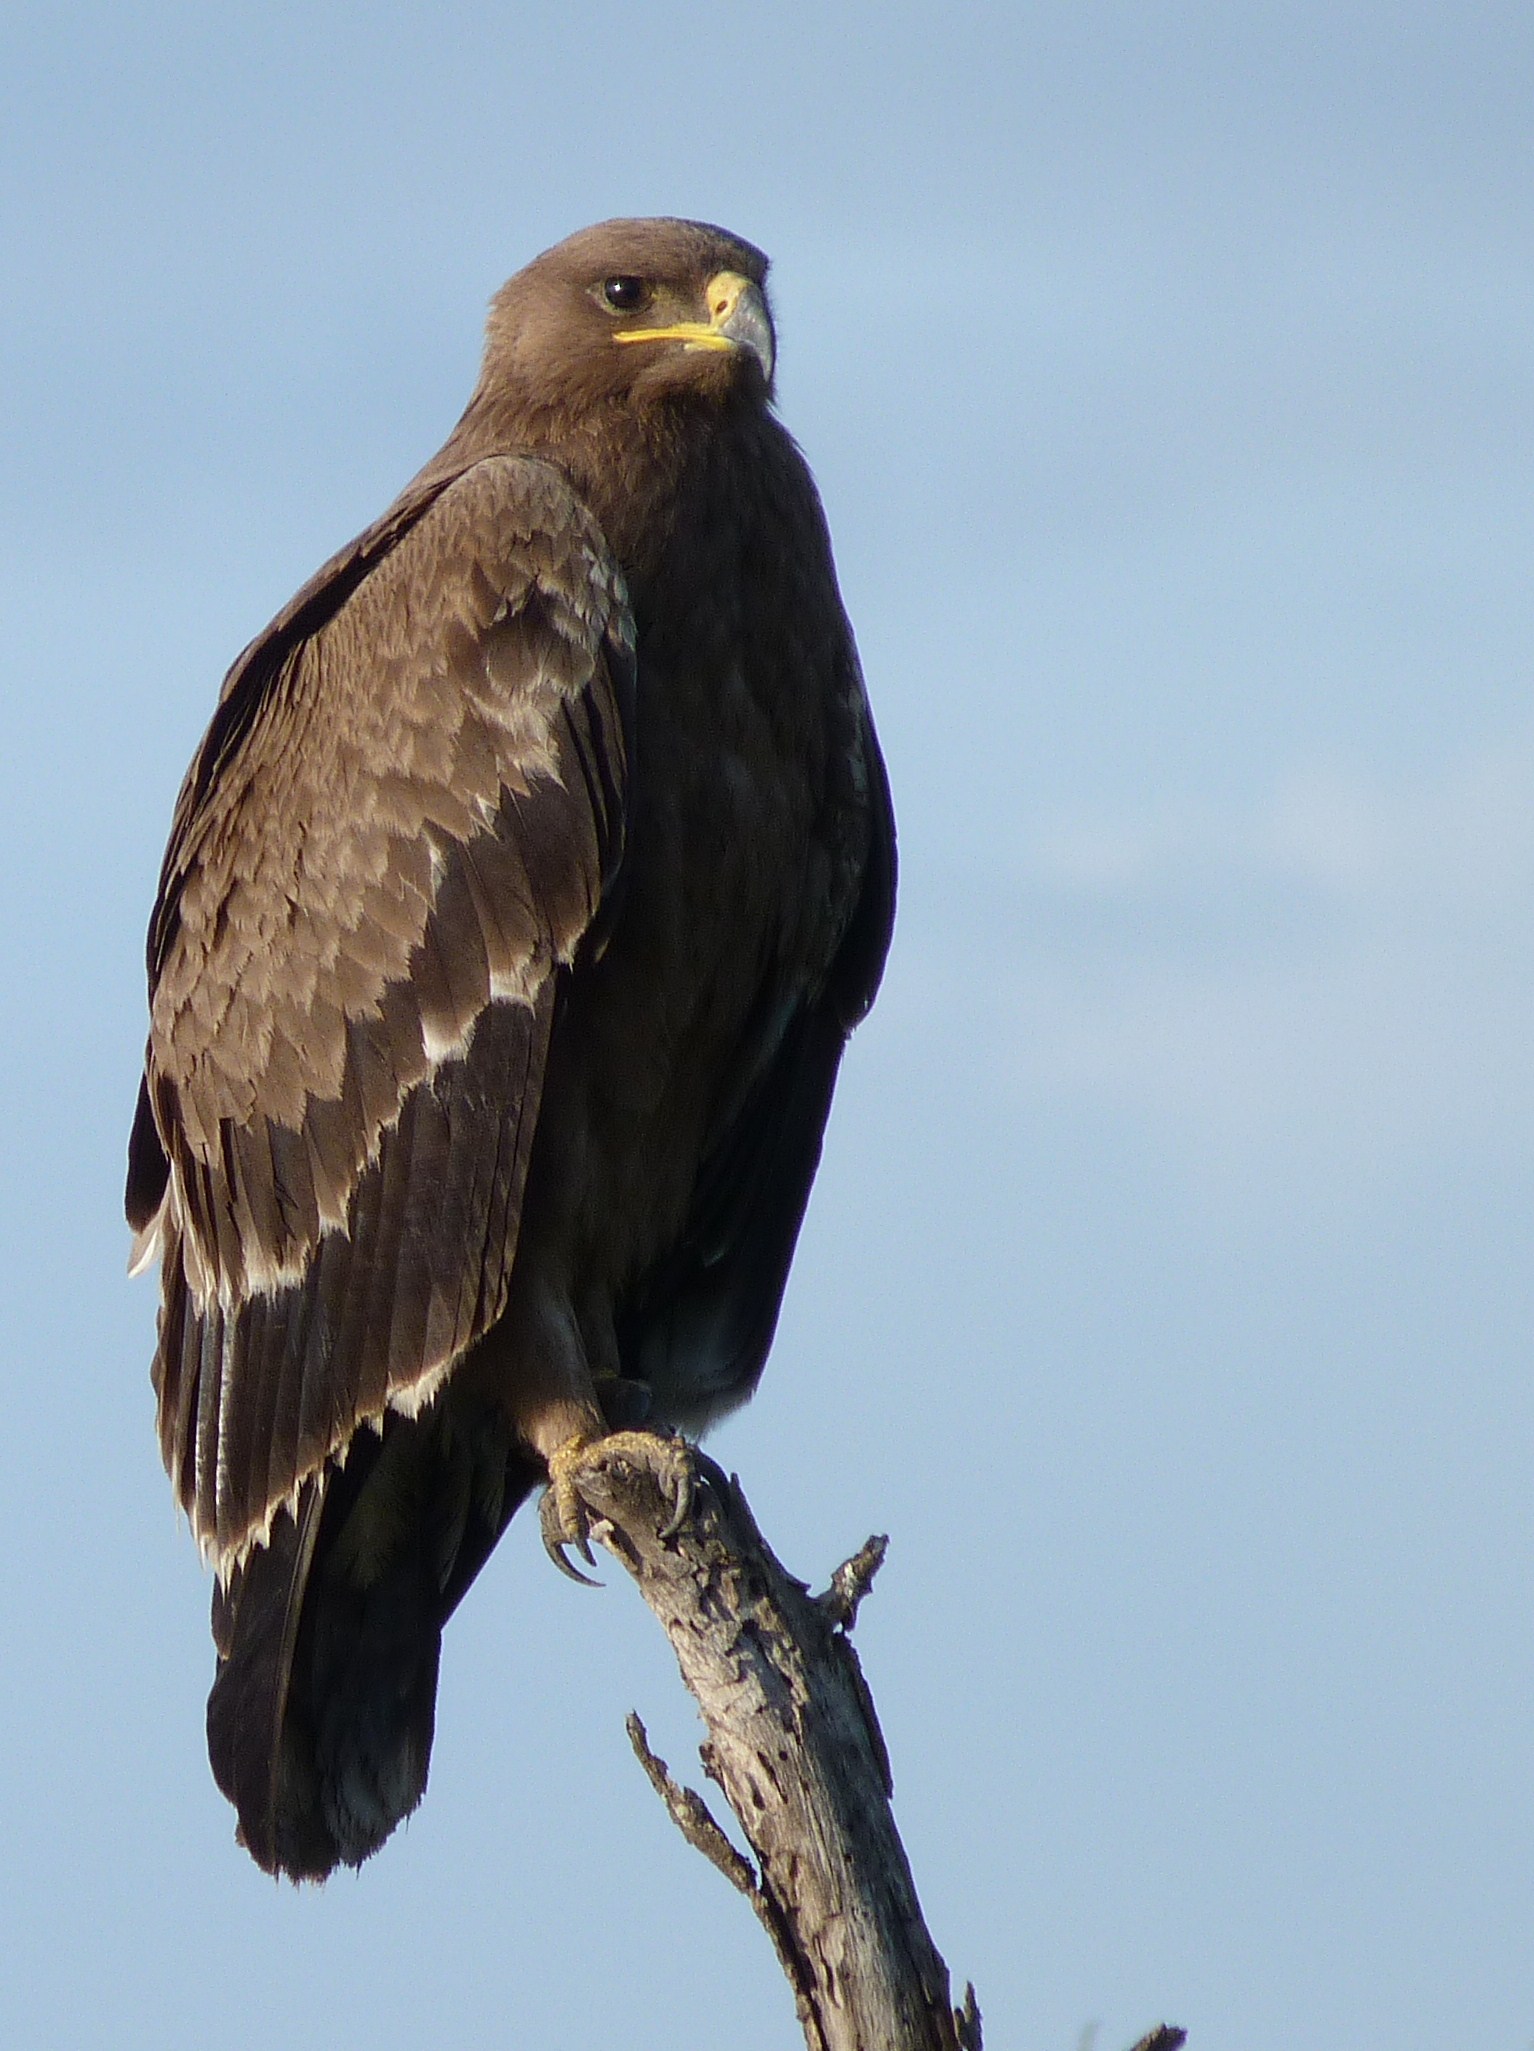 Image: This immature Steppe Eagle (Aquila nipalensis) is a winter visitor to the dry bush of Tanzania